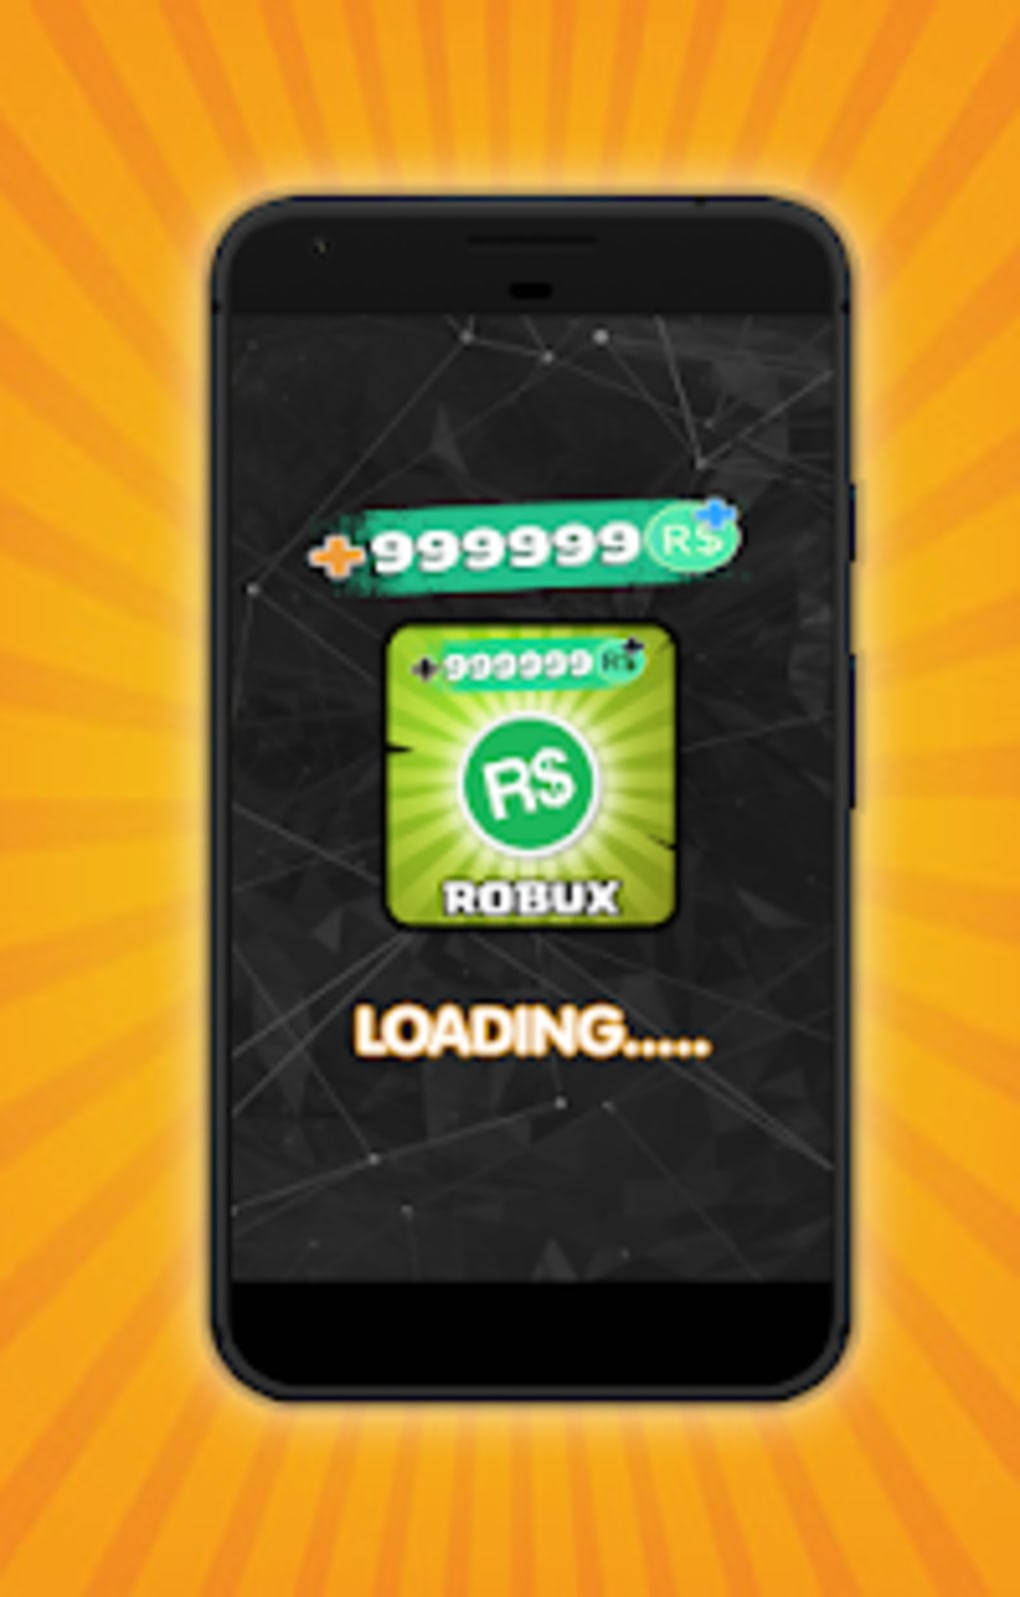 Get Robux How To Get Free Robux Calculator Pro For Android Download - get robux how to get free robux calculator pro